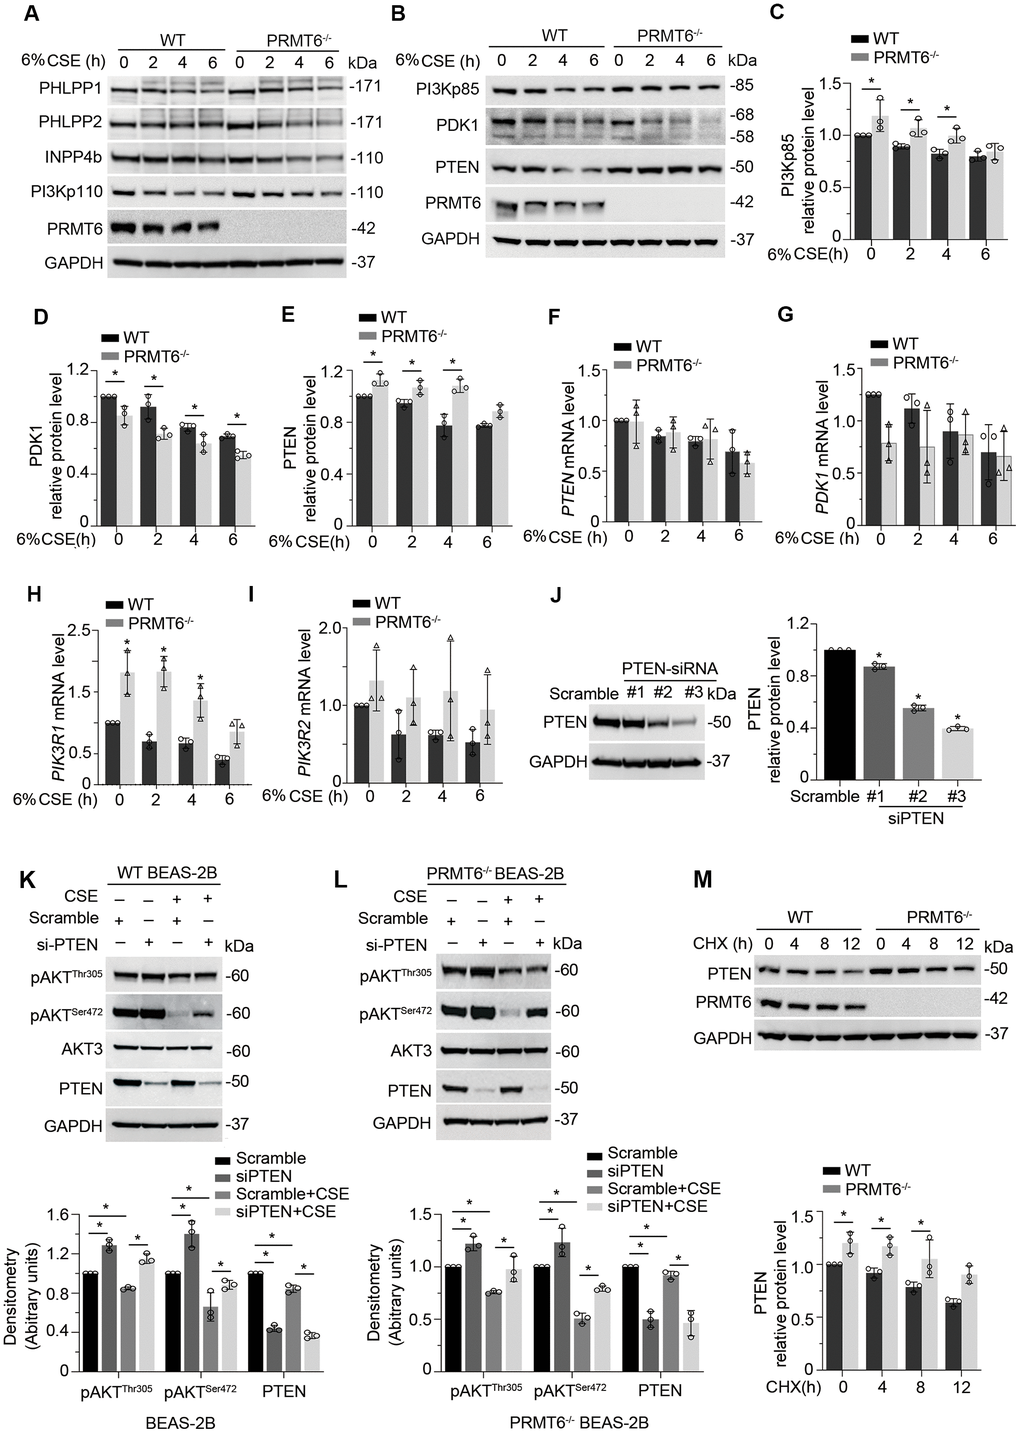 CSE suppresses AKT phosphorylation via PRMT6/PTEN signal transduction. (A, B) WT and PRMT6-/- BEAS-2B cells were treated with CSE at 2, 4, 6h. Western blotting was performed to detect the protein level of PHLPP1, PHLPP2, INPP4b, PI3Kp110, PI3Kp85, PDK1, PTEN, PRMT6 and GAPDH. (C–E) The plotted densitometry results of PI3Kp85, PDK1 and PTEN protein expression were presented. (F–I) WT and PRMT6-/- BEAS-2B cells were treated with CSE for 2, 4, 6h. qRT-PCR was performed to detect the mRNA level of PTEN, PDK1, PIK3R1 and PIK3R2. Results of qRT-PCR were shown as mean ± SD and representative of n=3 experiments. (J) Scramble siRNA and three kinds of double strands PTEN-siRNA were transfected into BEAS-2B separately. PTEN expression was detected by western blotting after transfection of PTEN-siRNA for 72hrs. Plotted PTEN protein level was presented in the right panel. (K, L) PTEN expression was silenced by DsiRNA in wild type and PRMT6 KO BEAS-2B cells. Western blotting was used to assay the AKT phosphorylation level. Representative blots of PTEN and PRMT6 were shown. (M) Cycloheximide (CHX, 100ug/ml) was applied to WT and PRMT6-/- BEAS-2B cells for 0, 4, 8, 12h. Densitometric results of PTEN and PRMT6 blots were plotted (lower panel). Results were representative of n=3 experiments. Statistics were measured by 1-way and 2-way ANOVA, *: p 